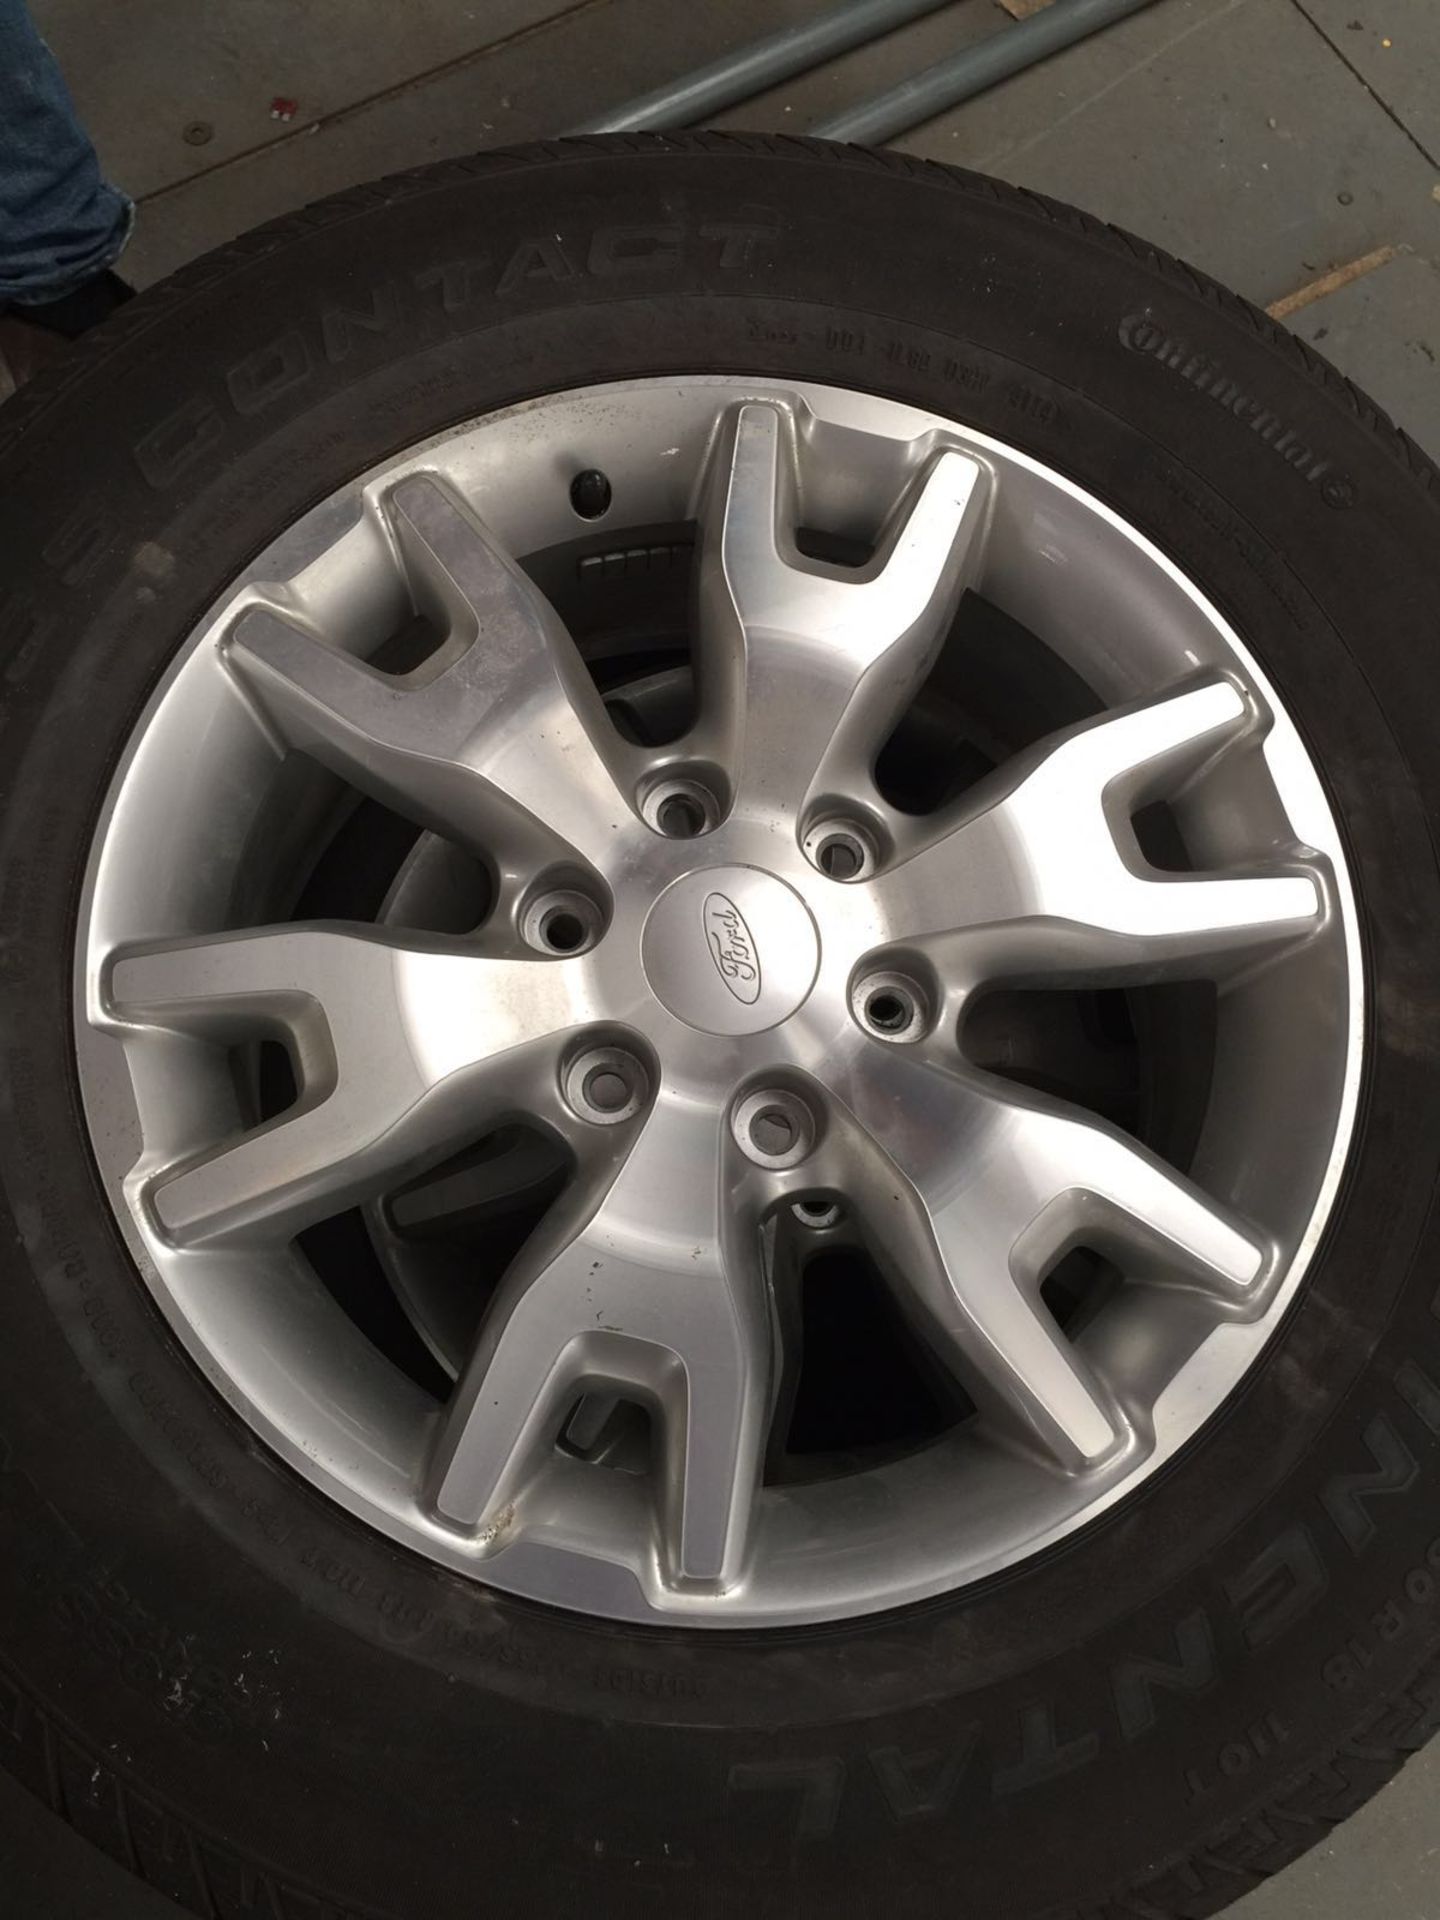 SET OF 4 2016 18" FORD RANGER ALLOY WHEELS WITH CONTINENTAL CROSS CONTACT TYRES ONLY 100 MILES - Image 3 of 5